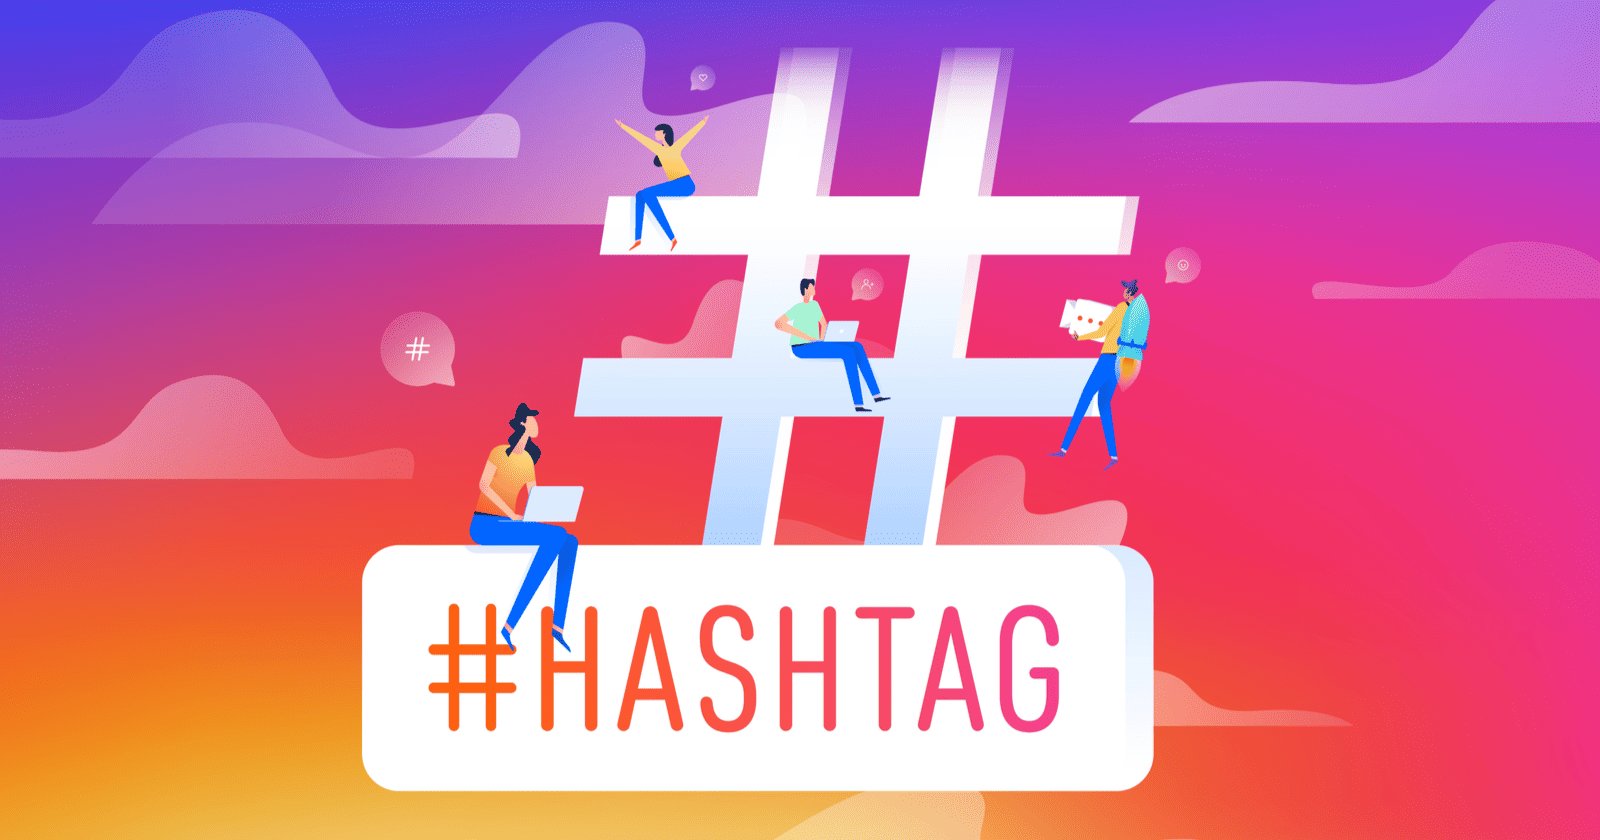 Instagram hashtags: How to find and use the best hashtags